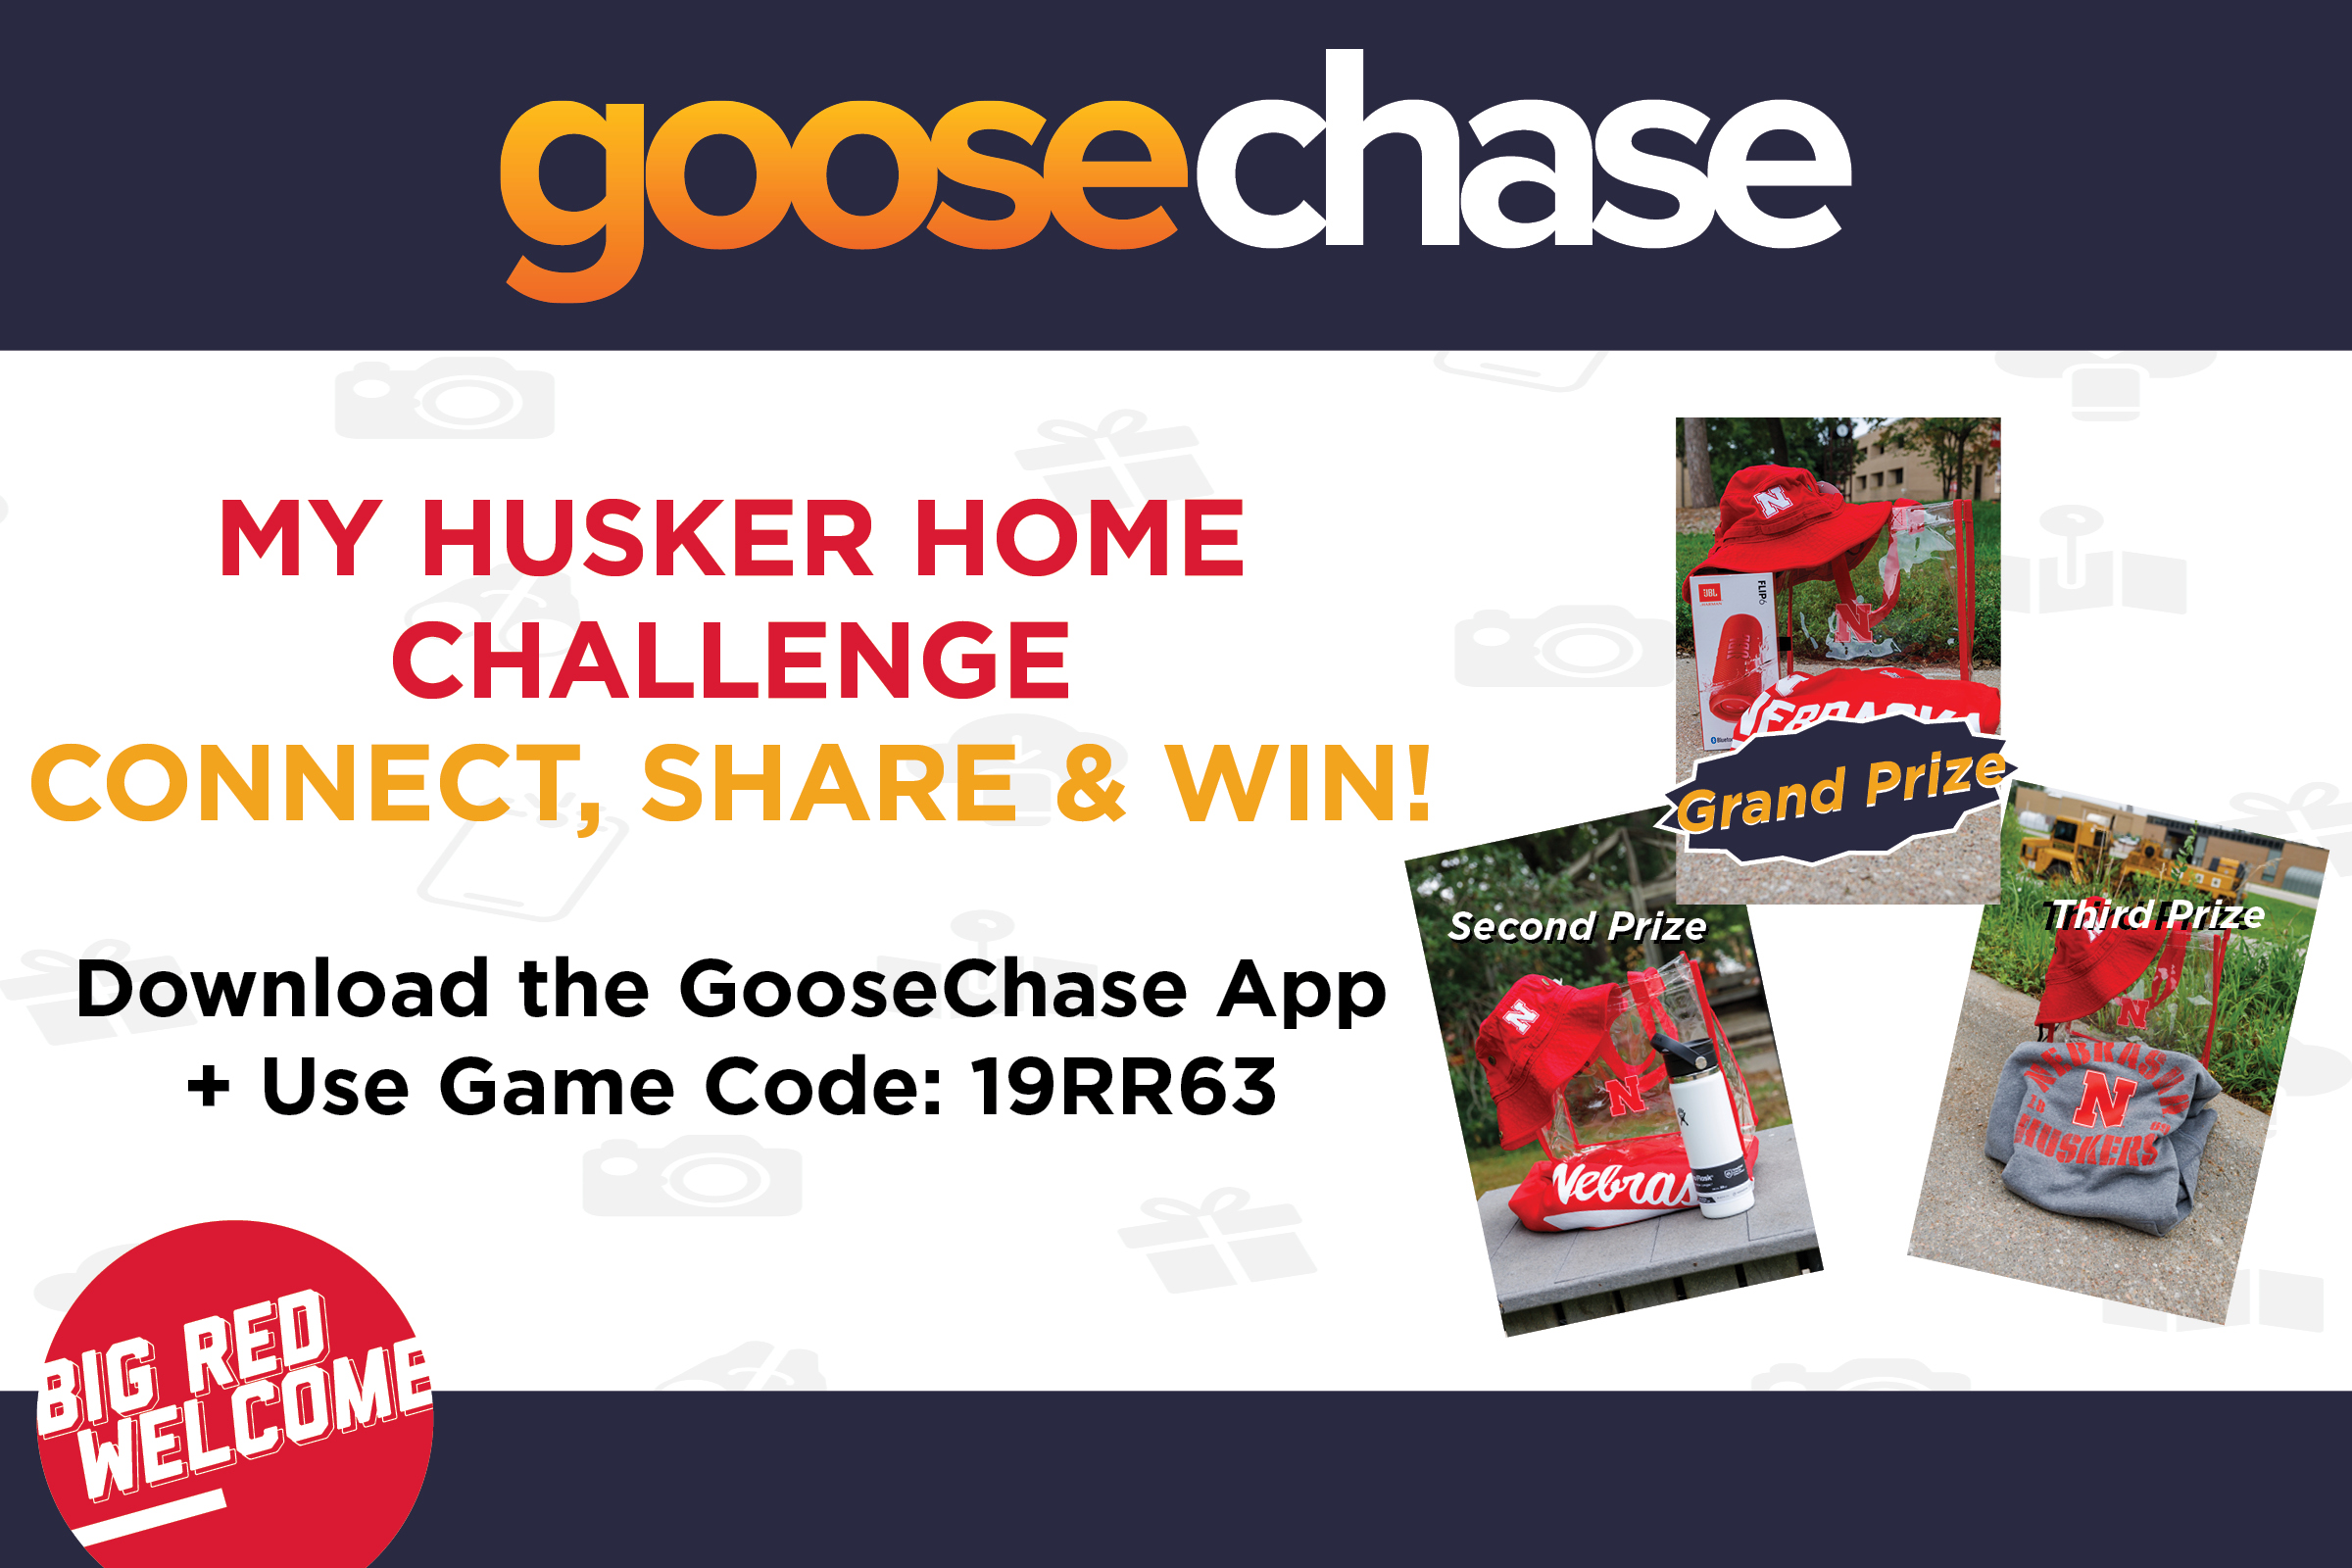 Download the Goosechase app + use game code 19RR63 to play for a chance to win prizes.